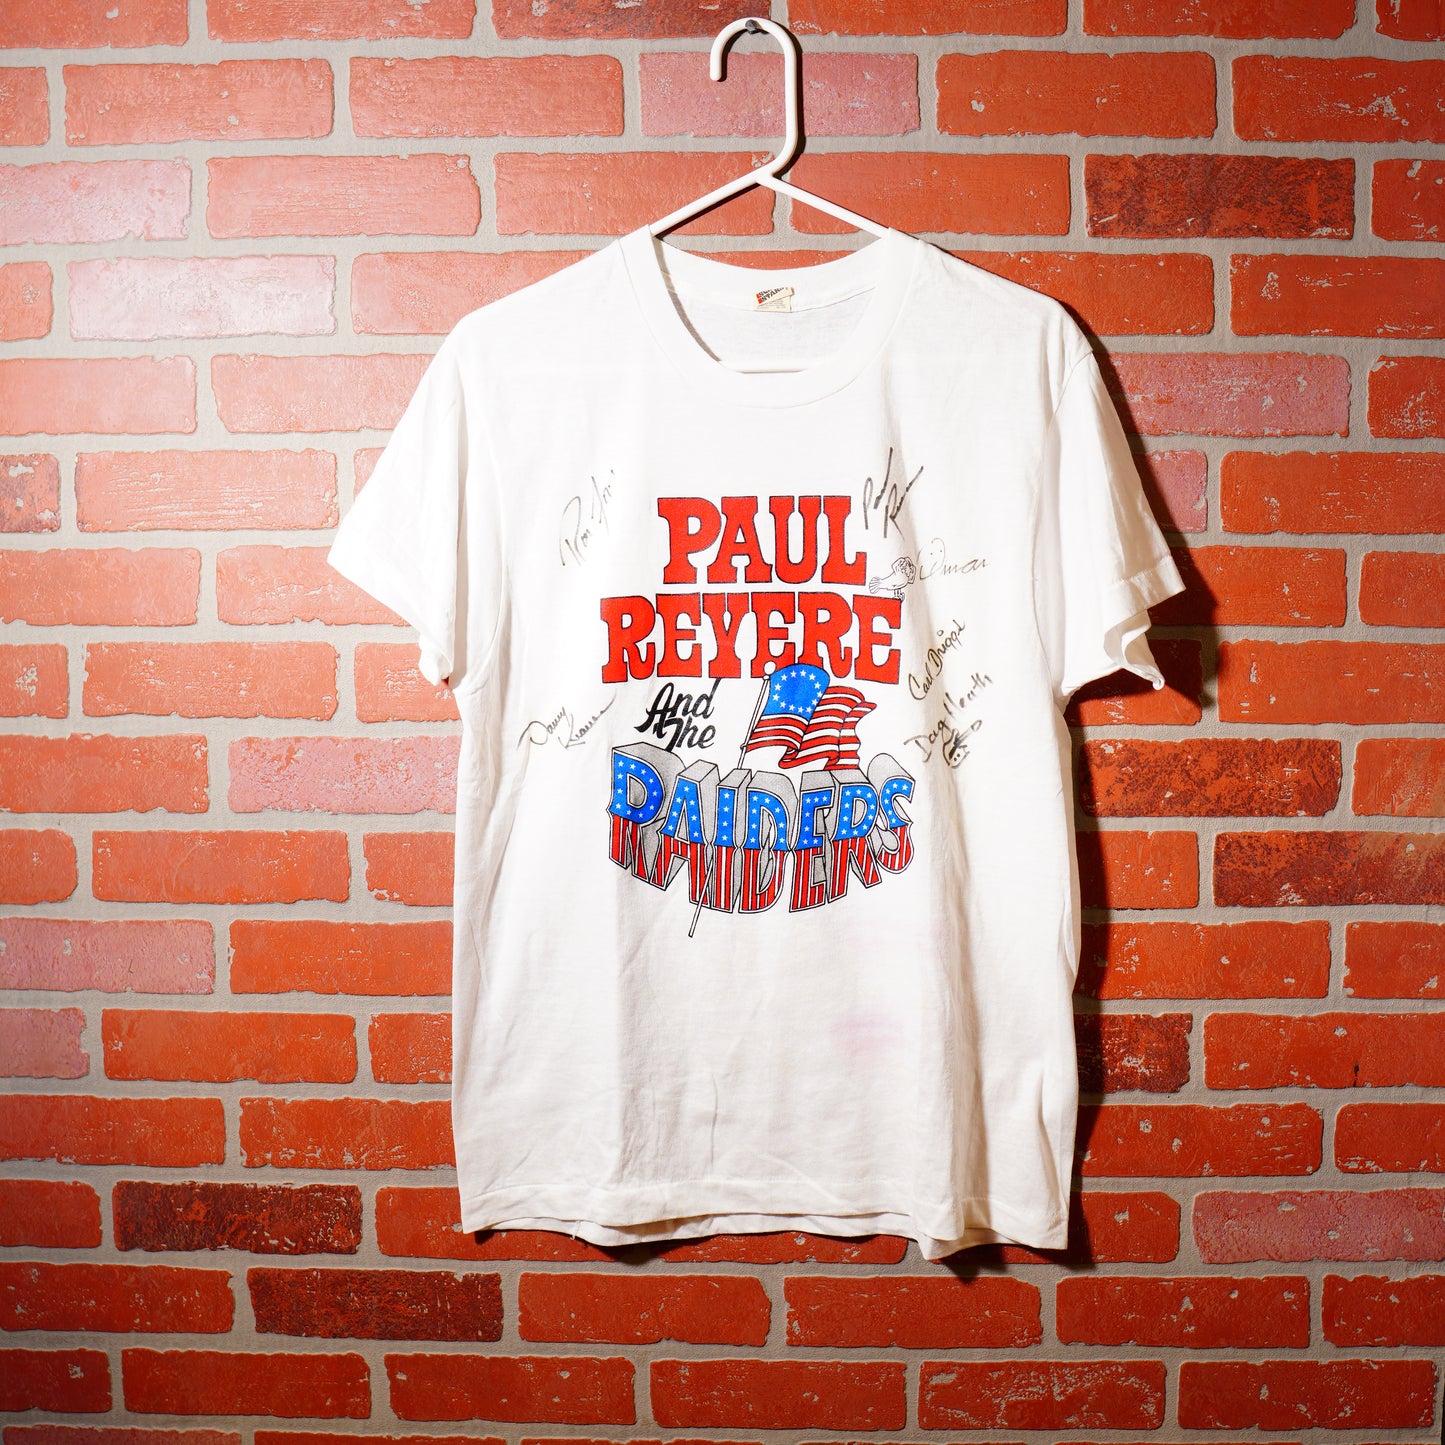 VTG Signed Paul Revere And The Raiders Tee